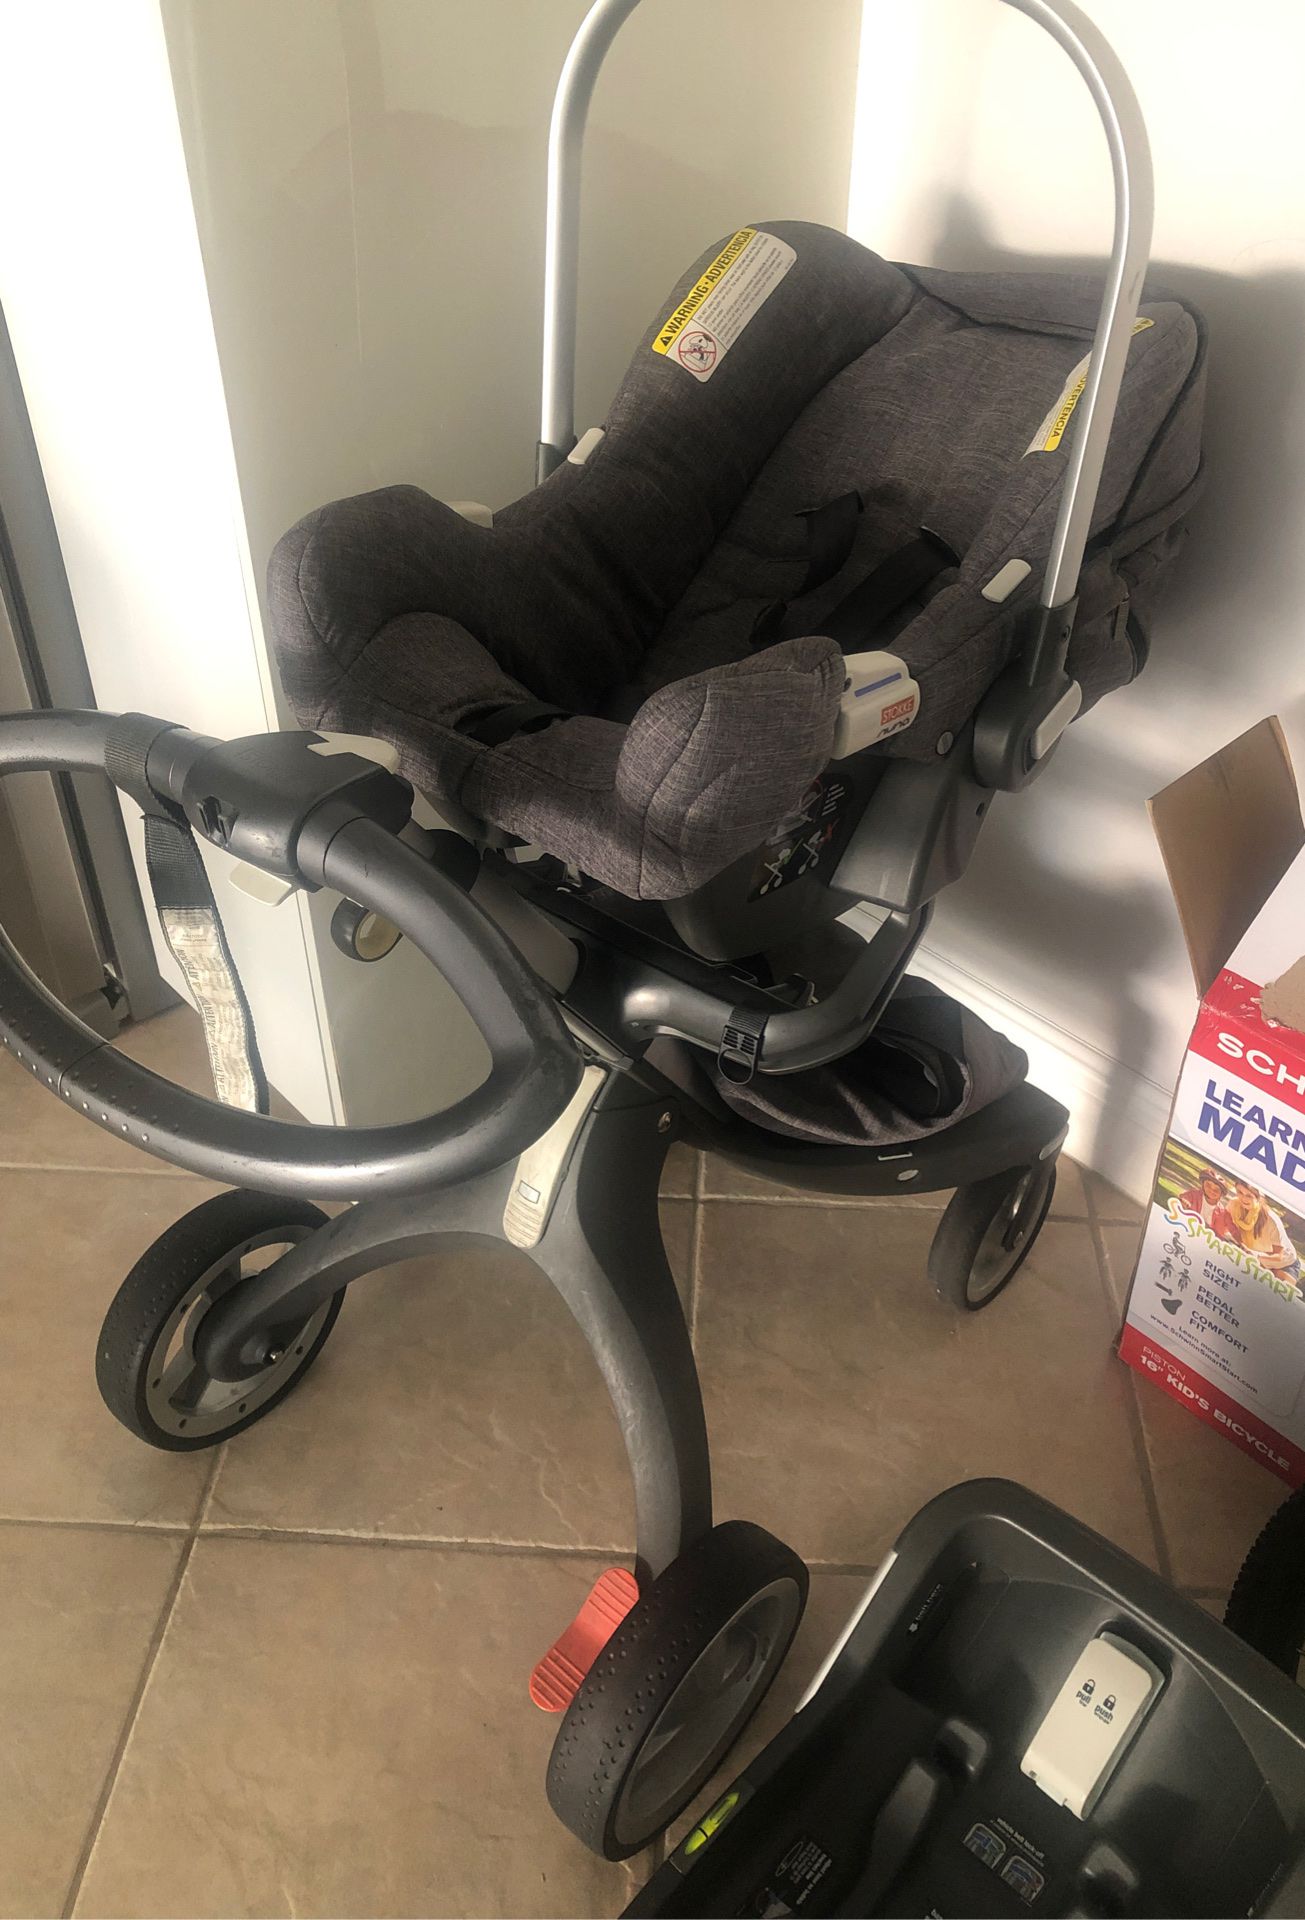 Stokke stroller and nuna car seat included in the same price